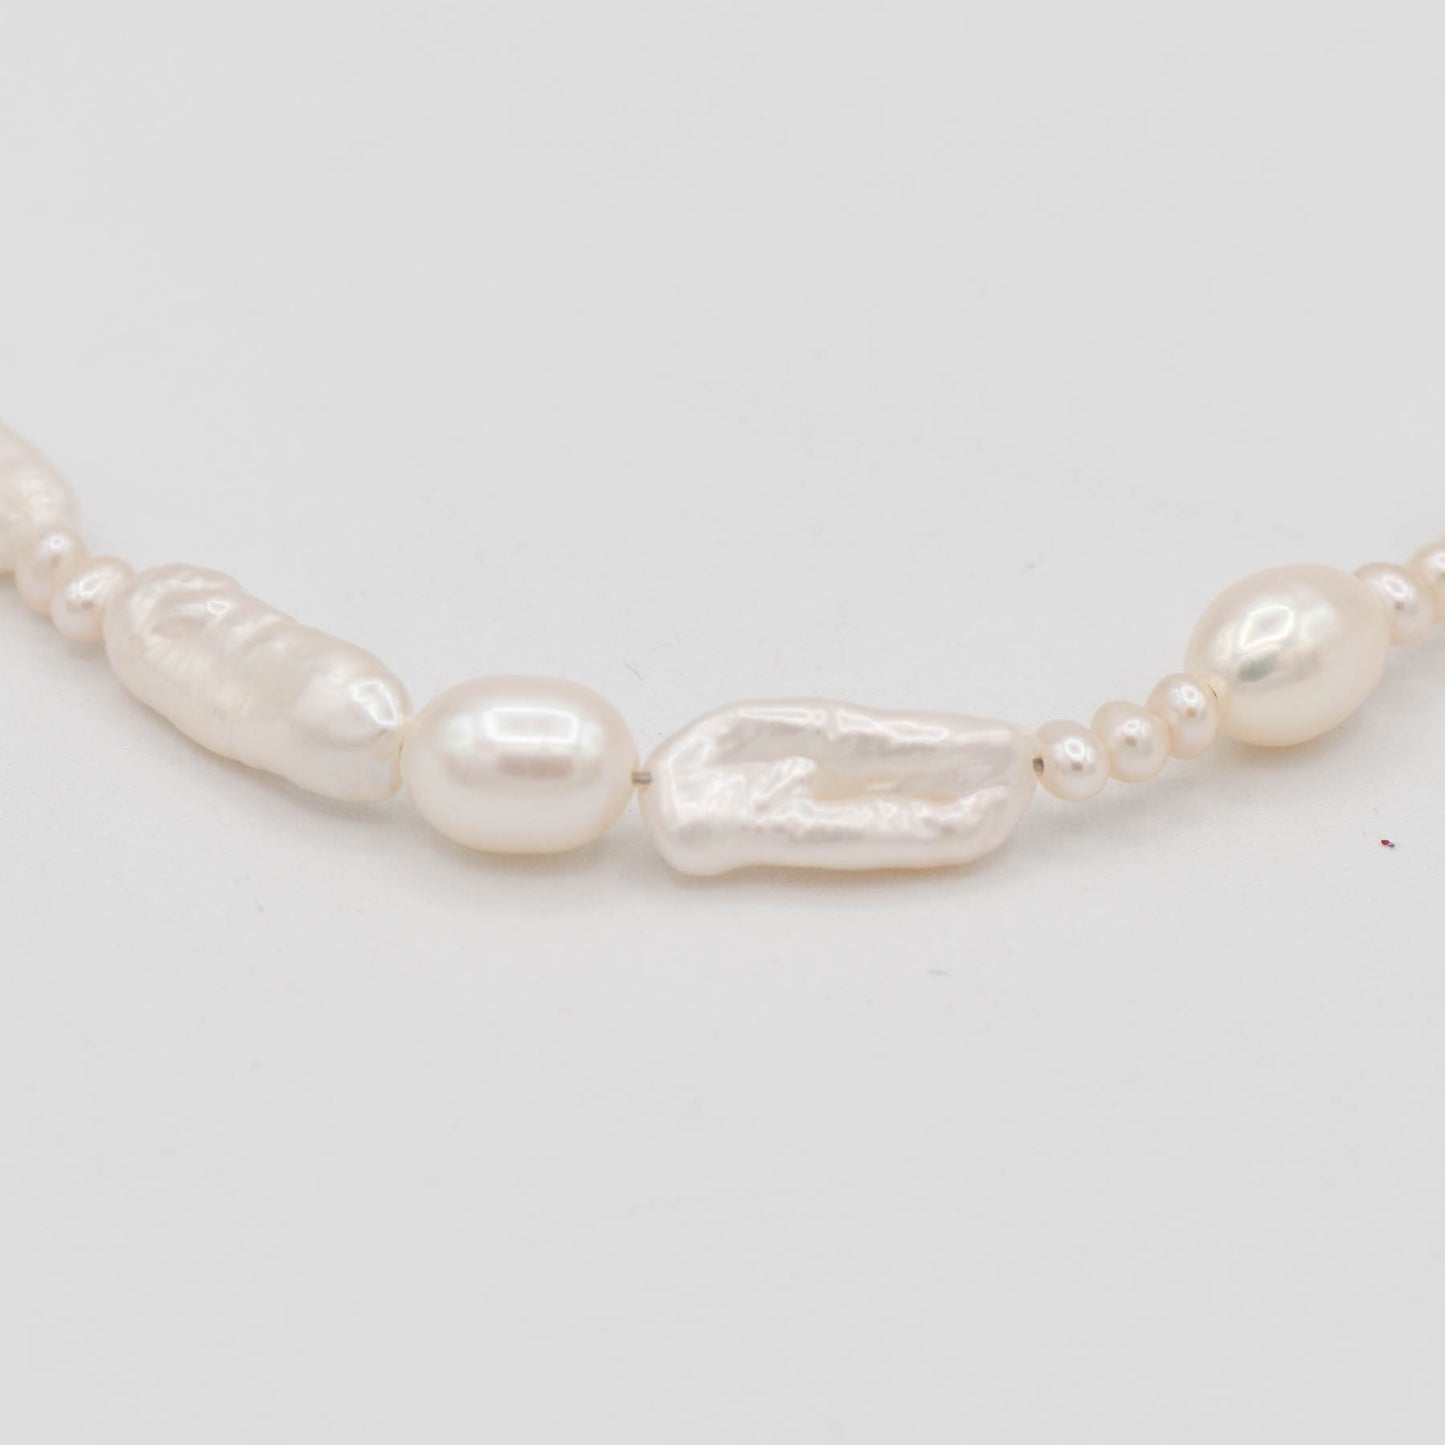 Stellar Hollywood - Mix Baroque Pearl Necklace - White